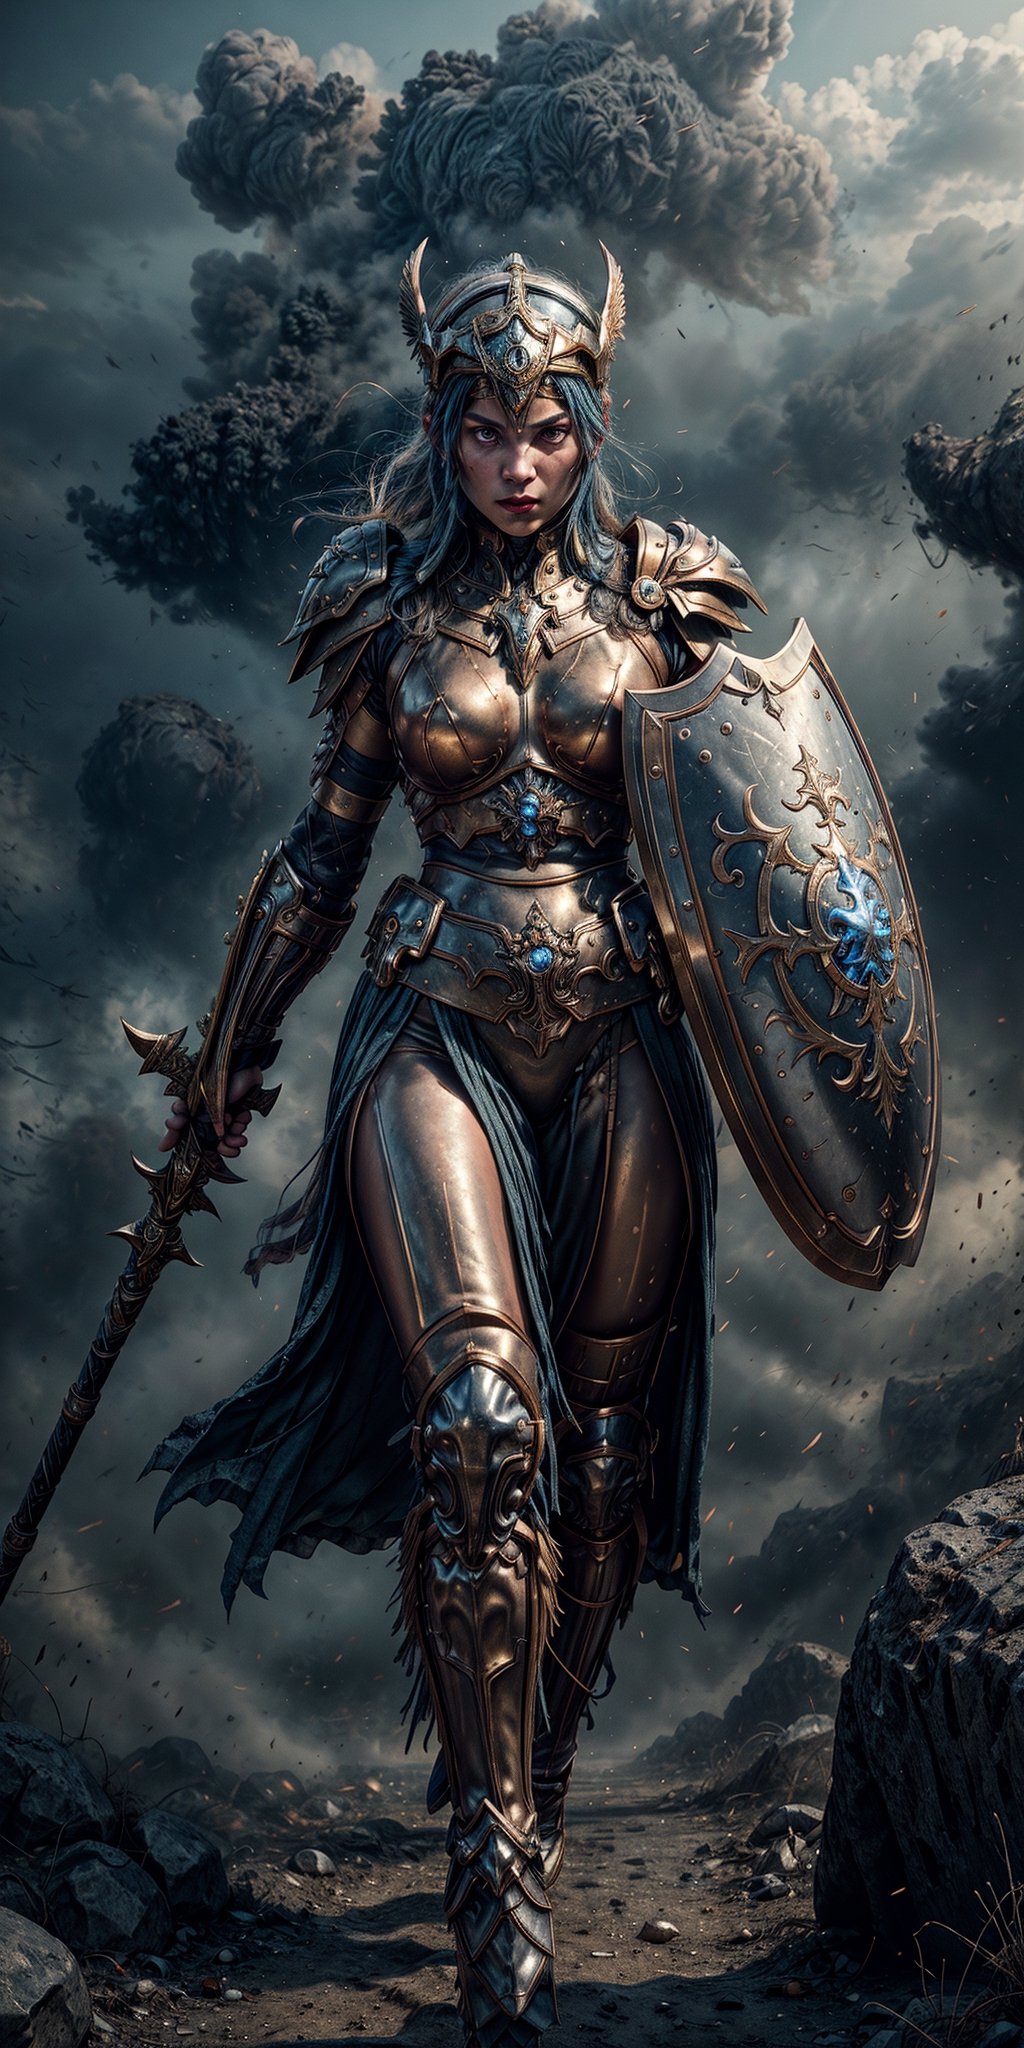 "Create a CG masterpiece with the best quality and stunning detail. It features Athena, the goddess of wisdom, holding a shield in her left hand, a spear in her right hand, adorned with a helmet and armor. She's in an attacking pose, standing amidst a dusty battlefield with a dark background. Please generate an 8K resolution wallpaper that captures this epic scene." (Perfect face), photographic cinematic super super high detailed super realistic image, 4k ultra HDR quality image, (masterpiece 1.2)